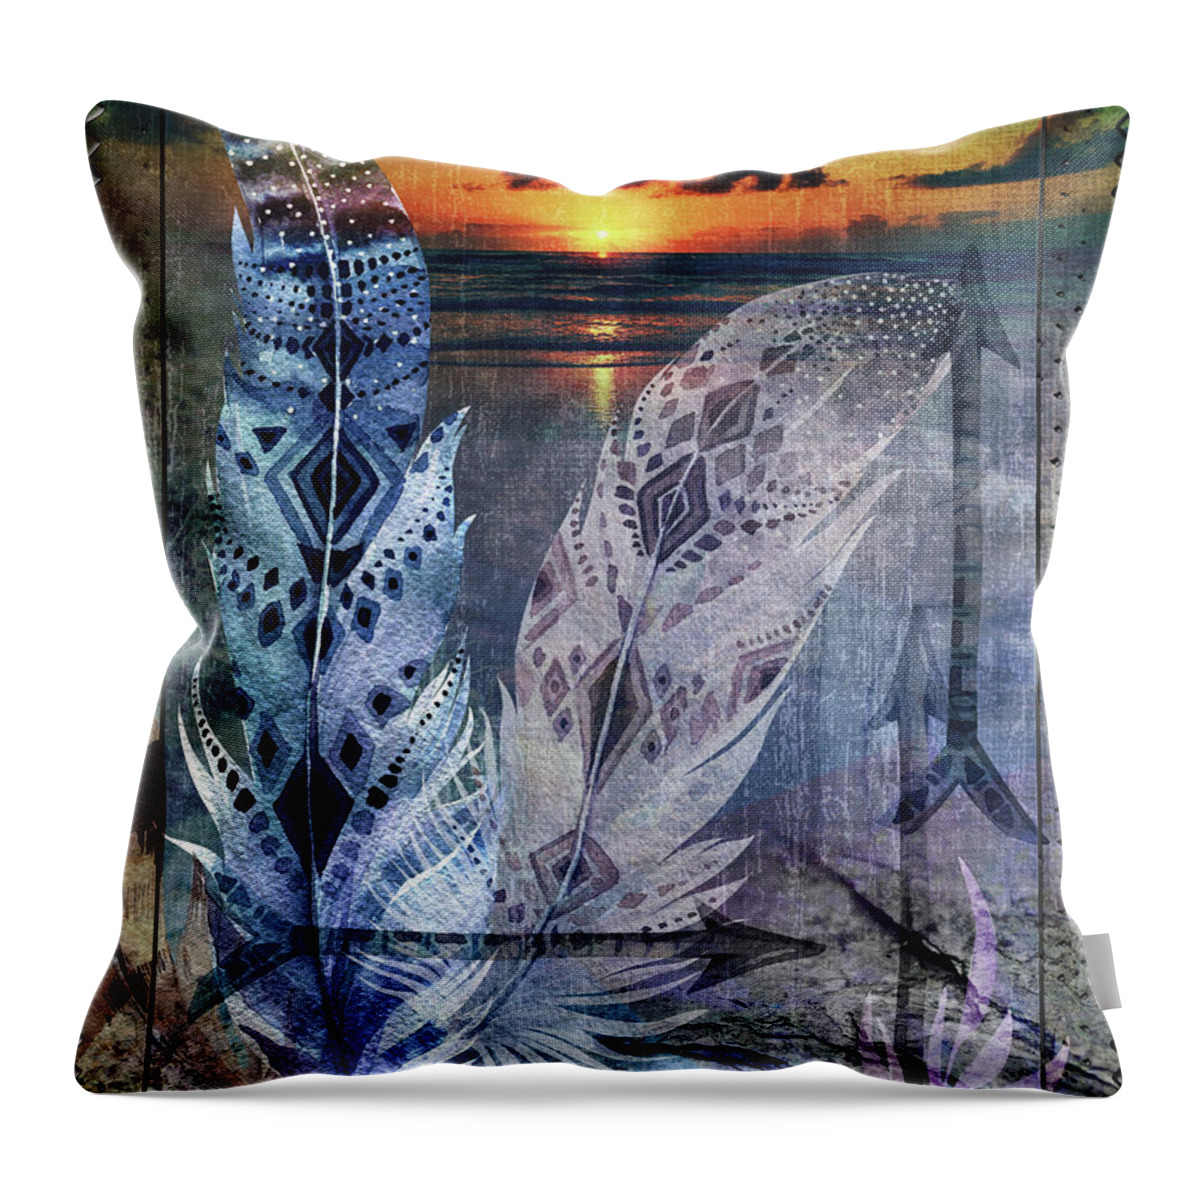 Native American Throw Pillow featuring the digital art Tapestry by Linda Carruth